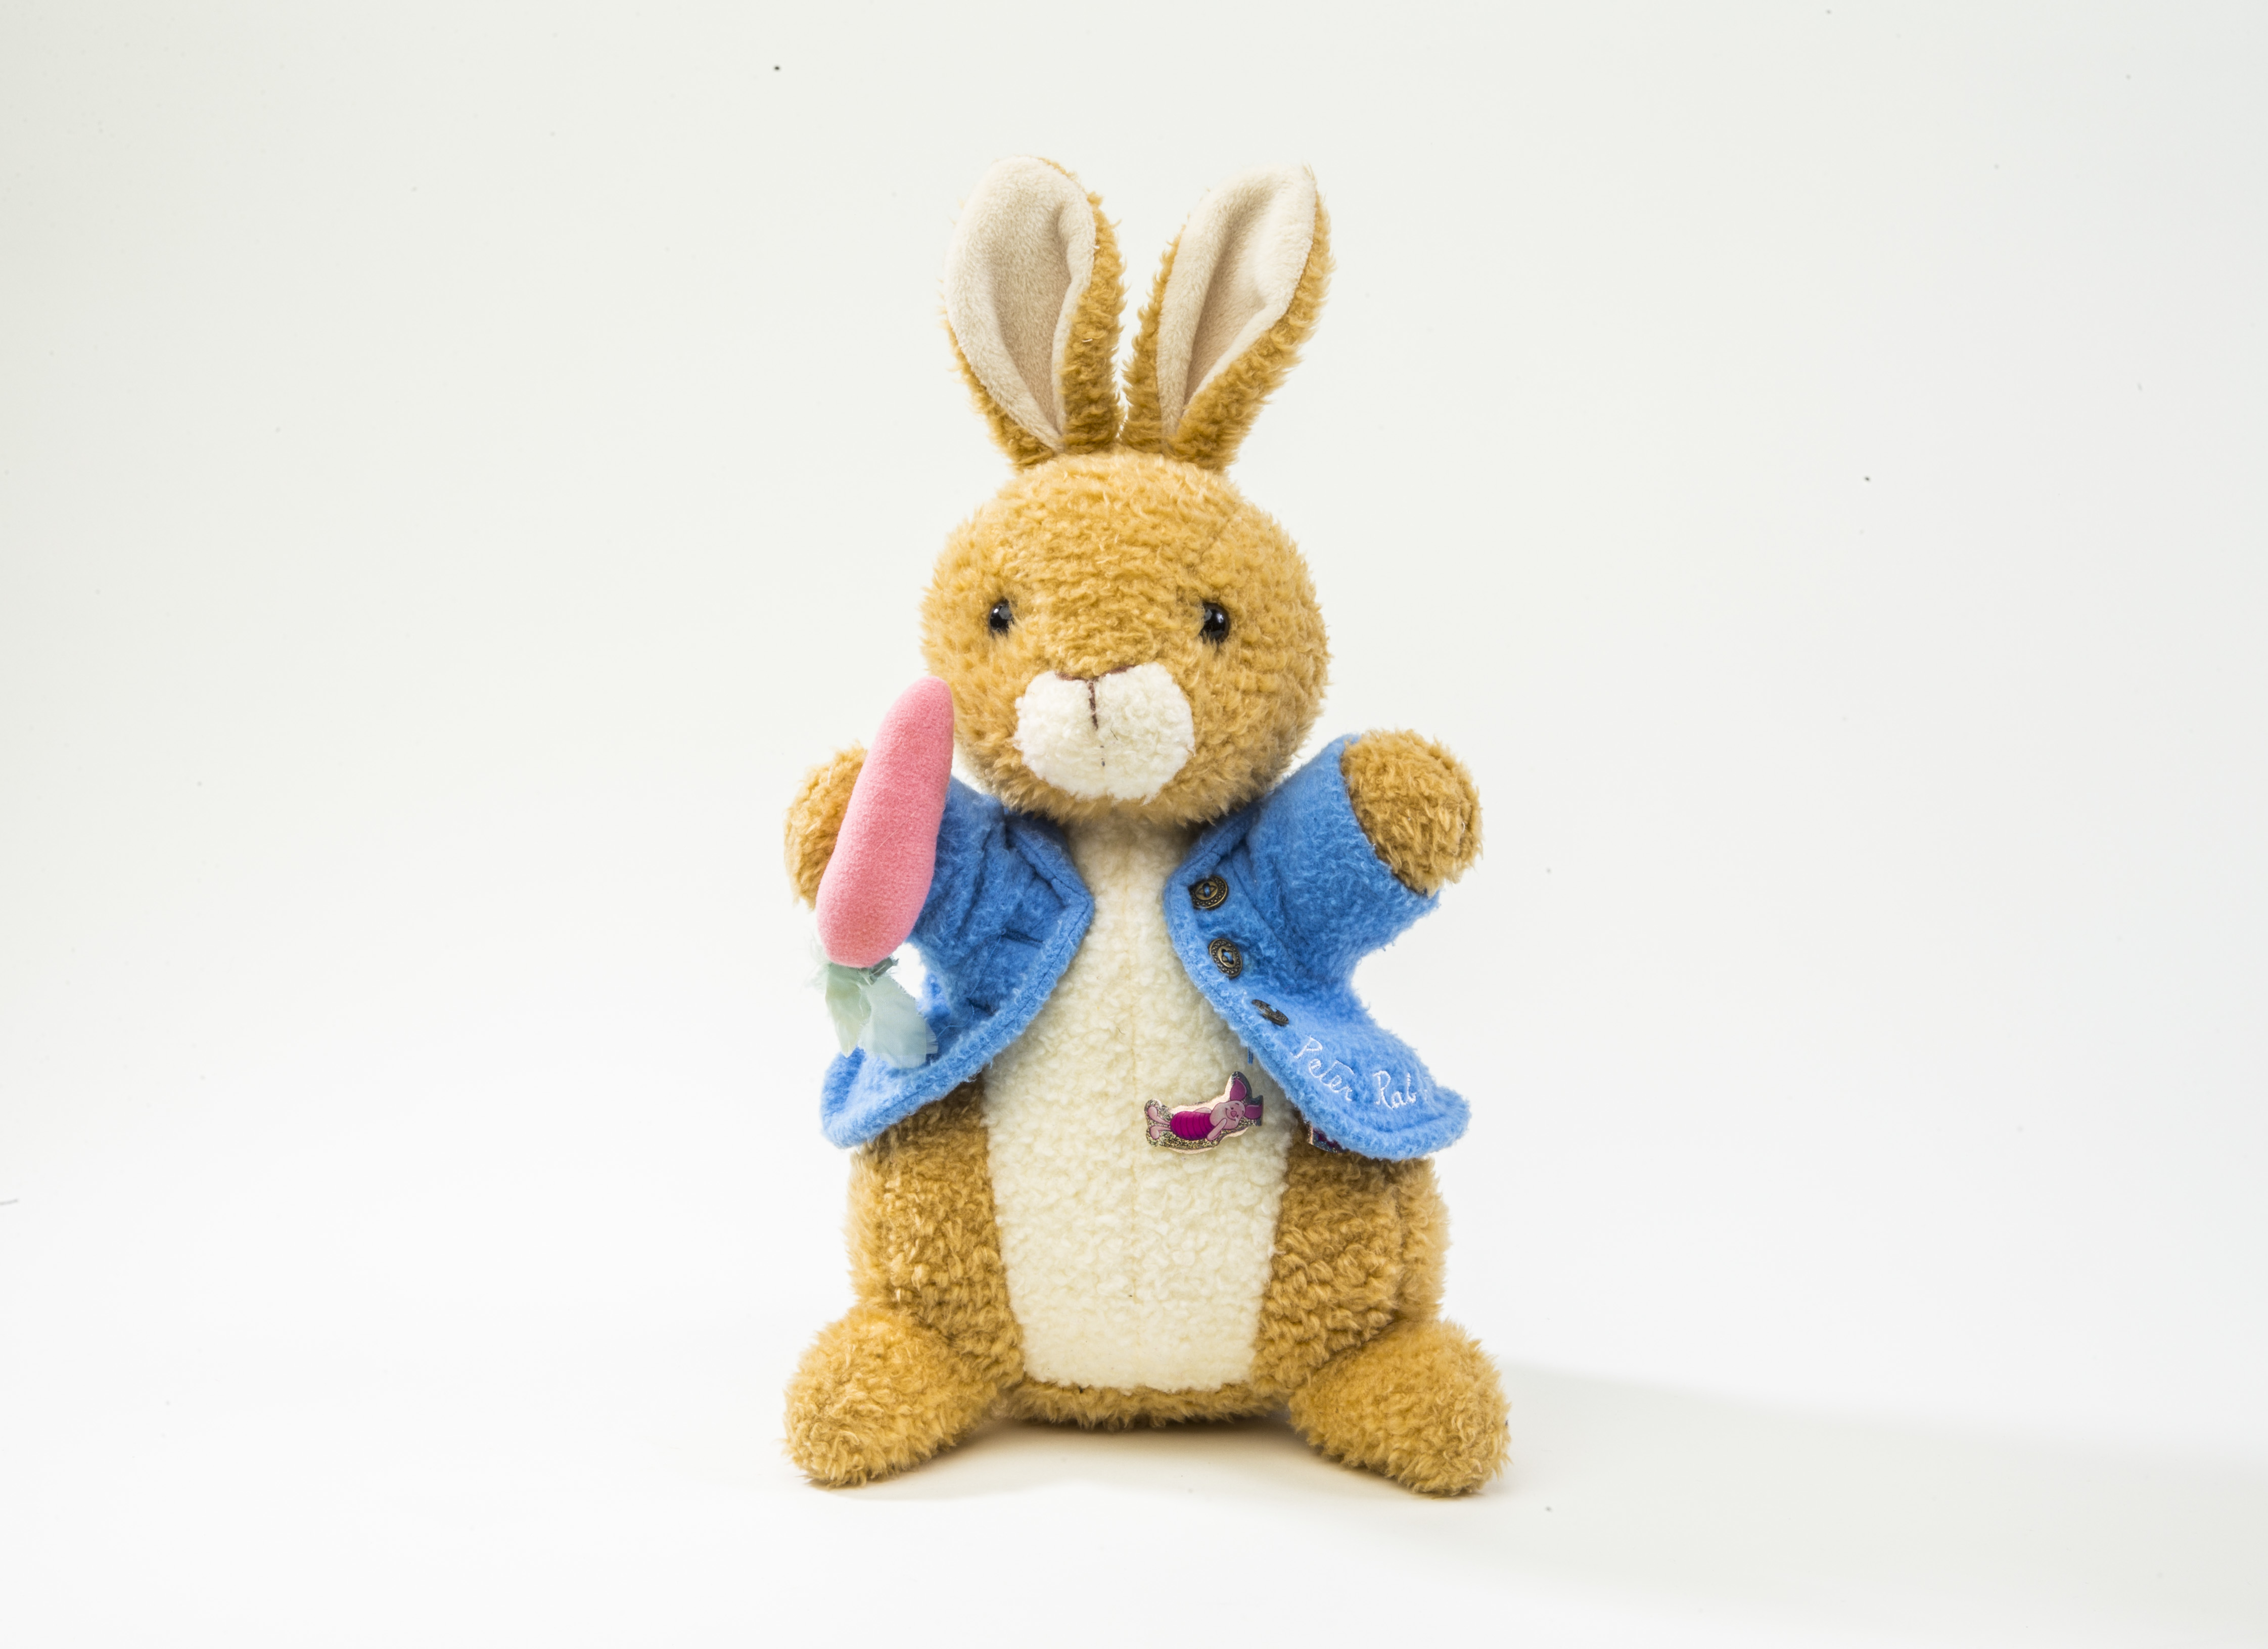 A Peter Rabbit stuffed animal that belonged to the youngest 9/11 victim, Christine Lee Hanson, is displayed on a white surface at the Museum.